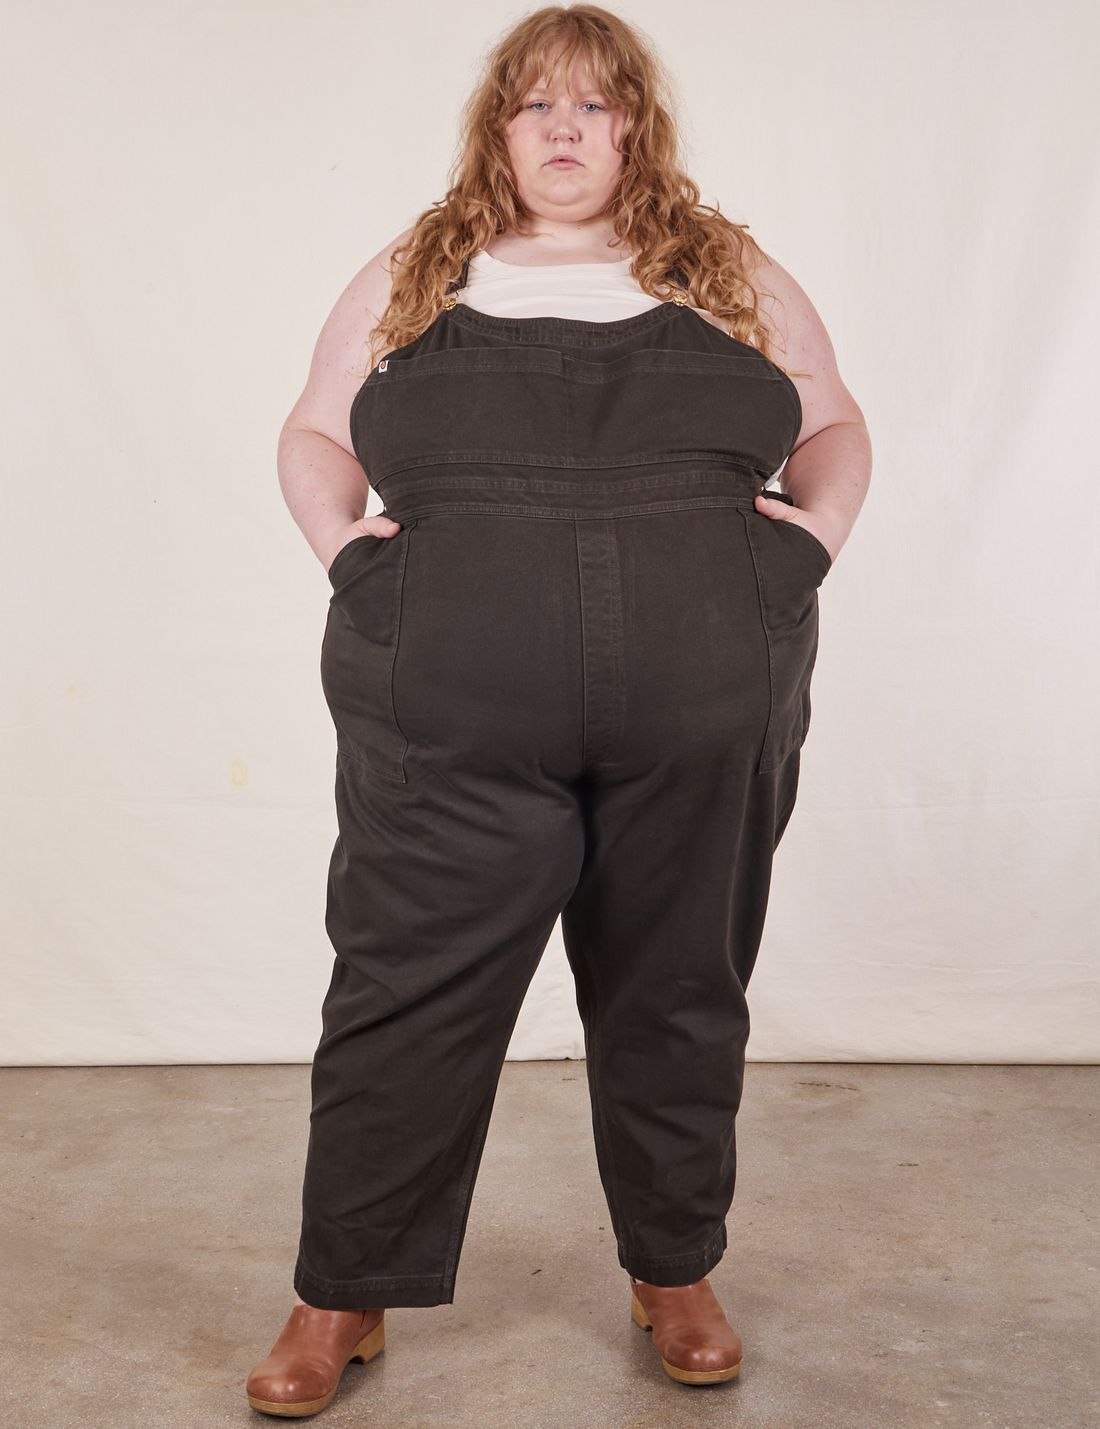 Catie is 5'11" and wearing size 5XL Original Overalls in Mono Espresso